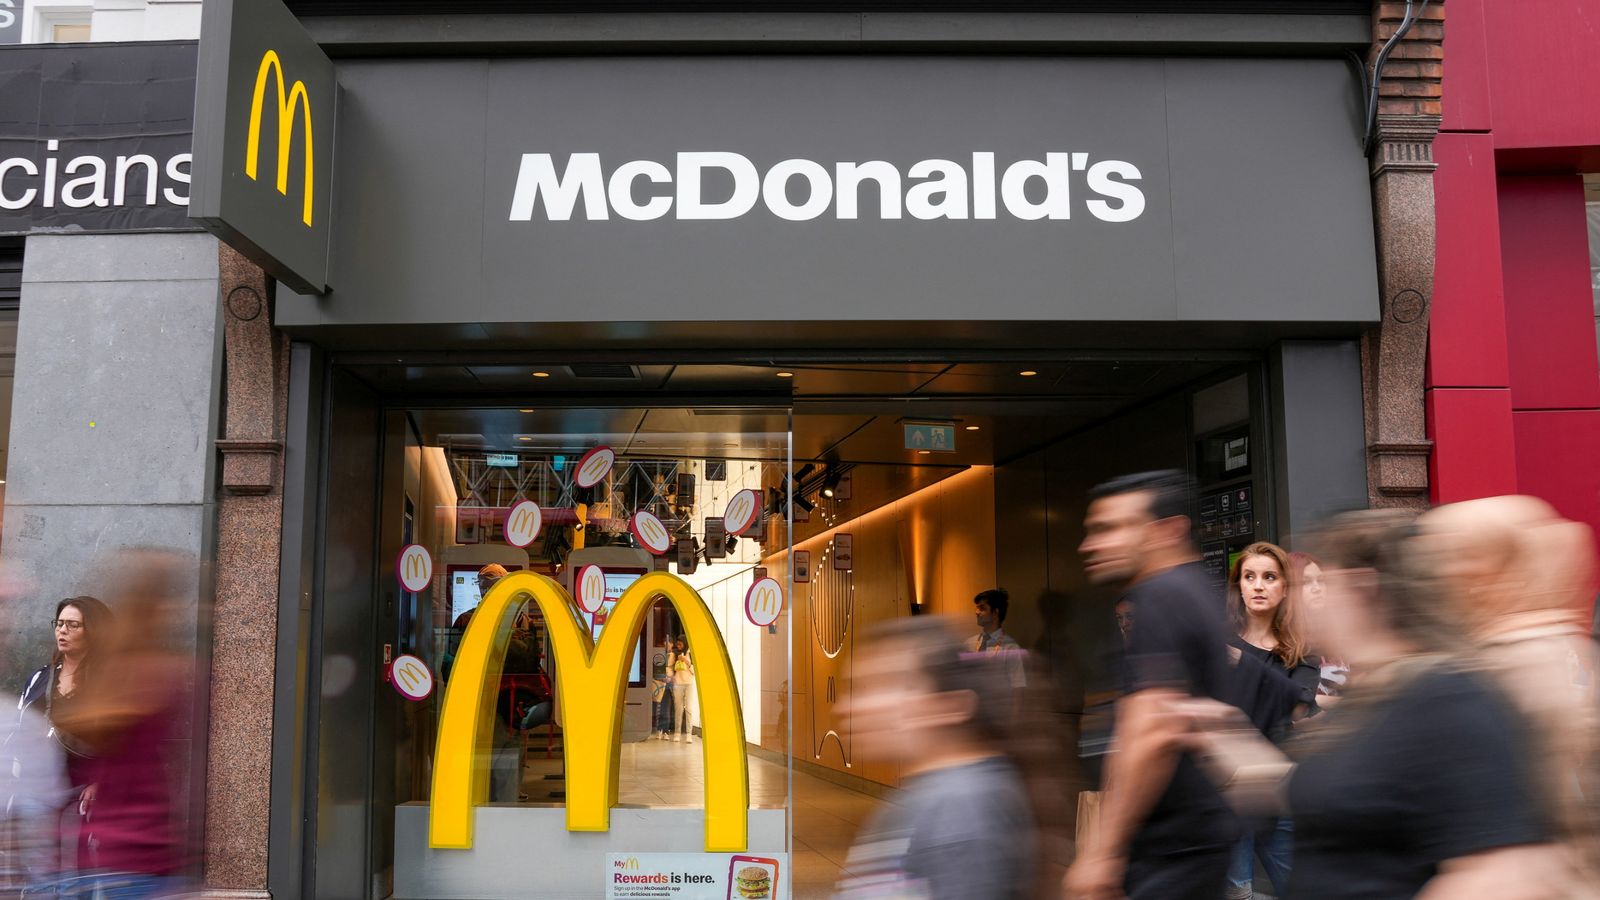 War in Gaza hits McDonald's with 'meaningful business impact' following calls for boycotts